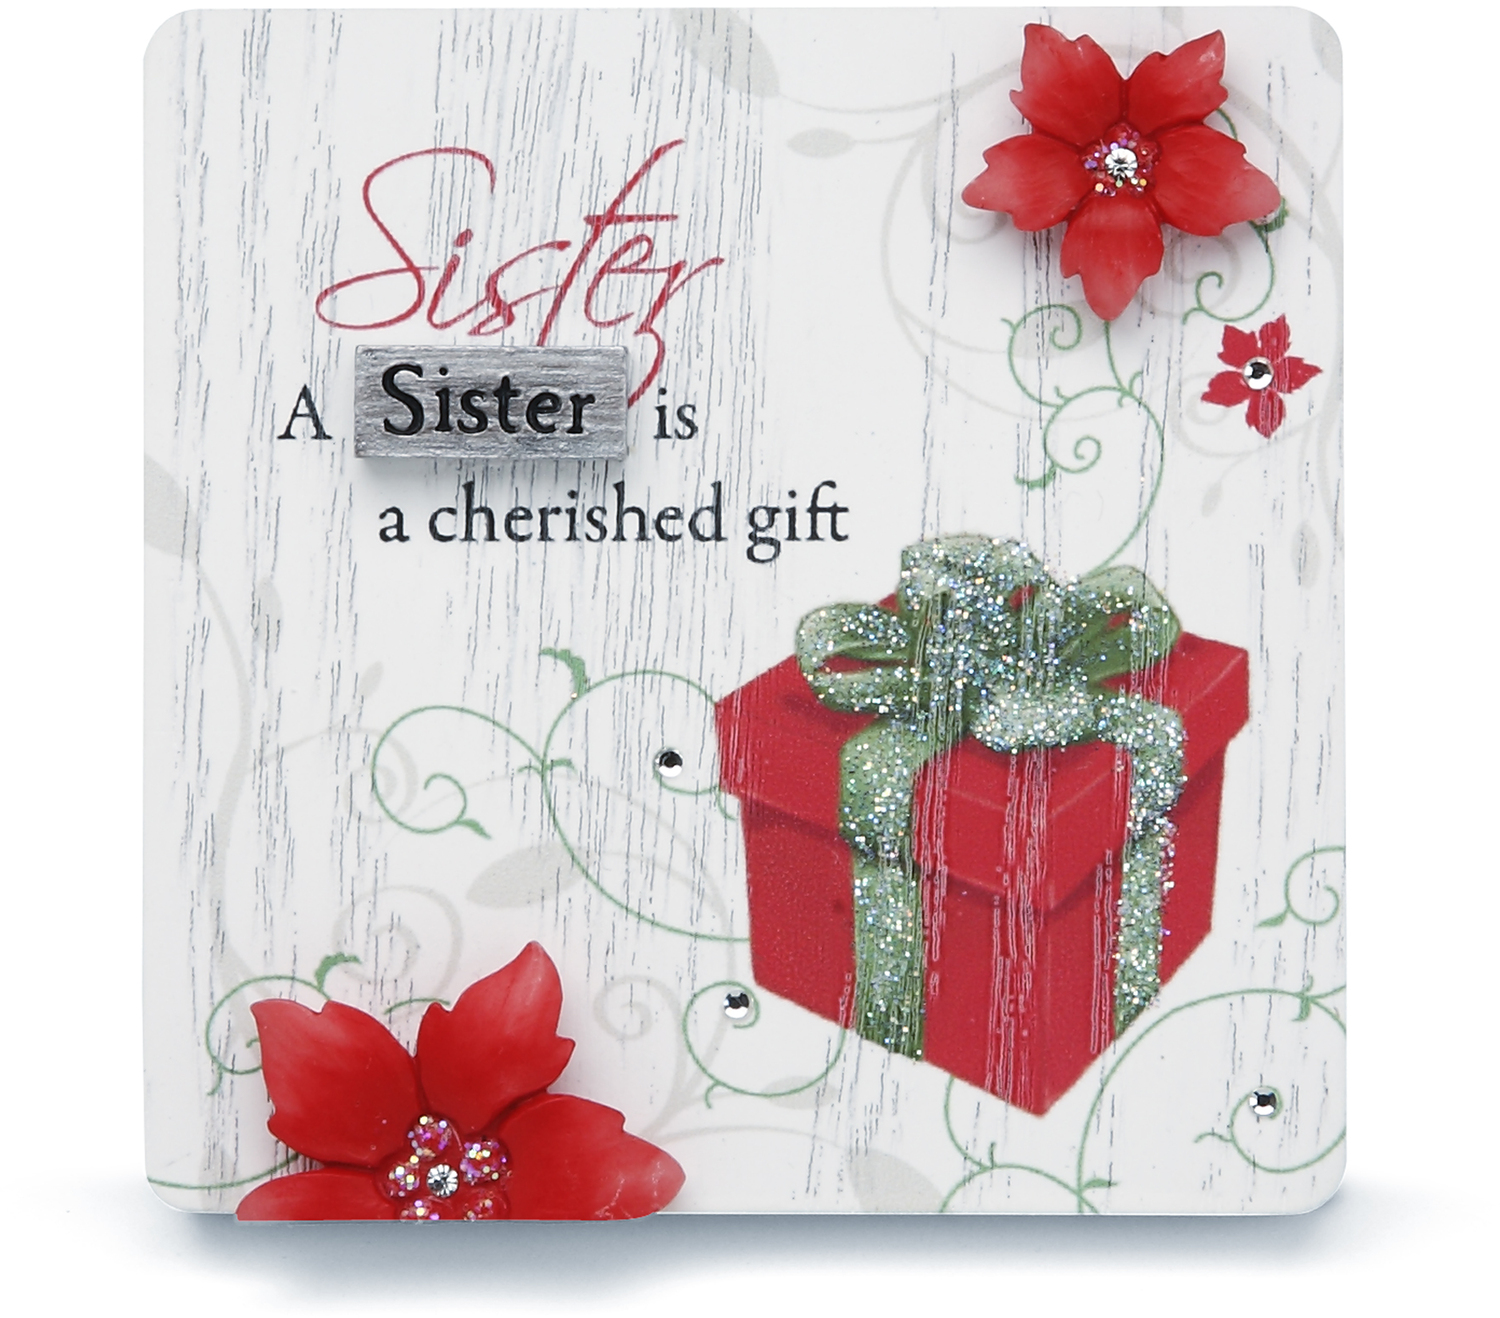 Sister by Mark My Words - Sister - 3" x 3" Self-Standing Plaque